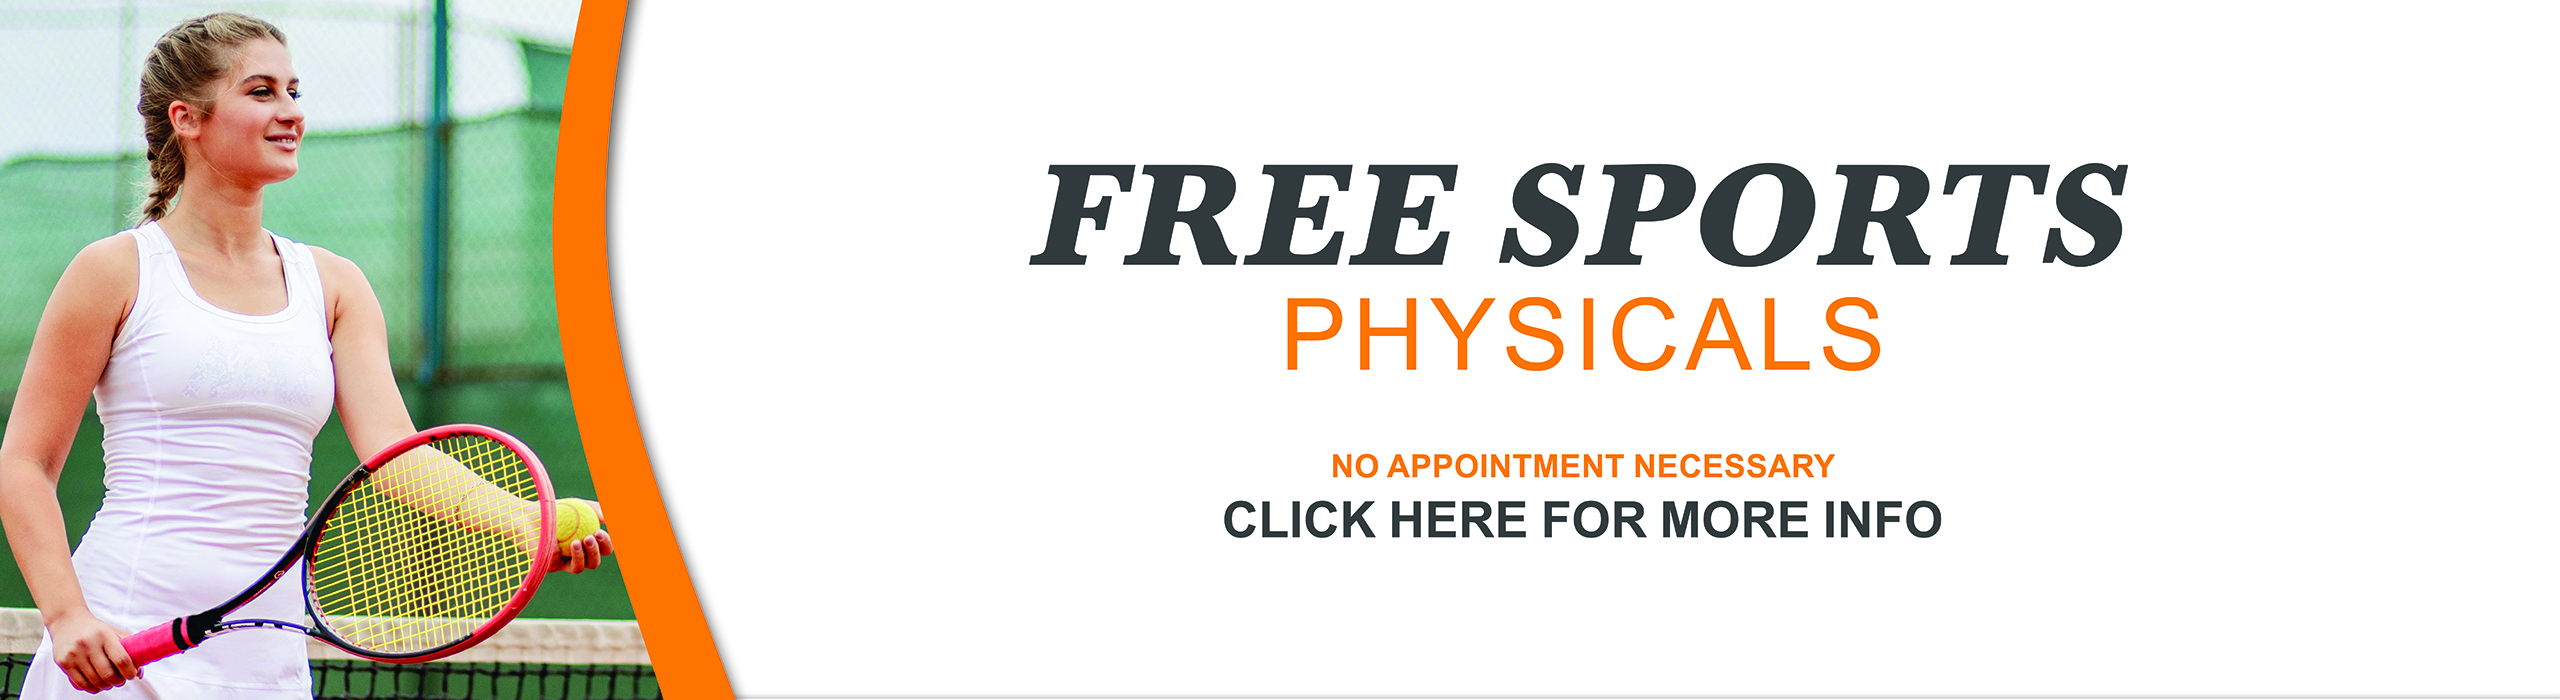 Banner picture of a football, volleyball, & soccer ball. Banner says:

Free Sports Physicals
No Appointment Necessary

Primary Care Clinic 
722 West North Street, Grangevila
Wednesday, July 20th
3:0 p.m - 6:00 p.m.

Kooshia Clinic
002 North Main Street, Kooskia 
Wednesday, August  3rd
1:00- 5:00p.m.

* Phyisical FREE, 100% of any donation goes directly to the school of your choice.

*Loose fitting clothes, shorts, and t-shirts recommended
*All forms must be signed by parent or guardian

(CLICK HERE FOR FORMS)